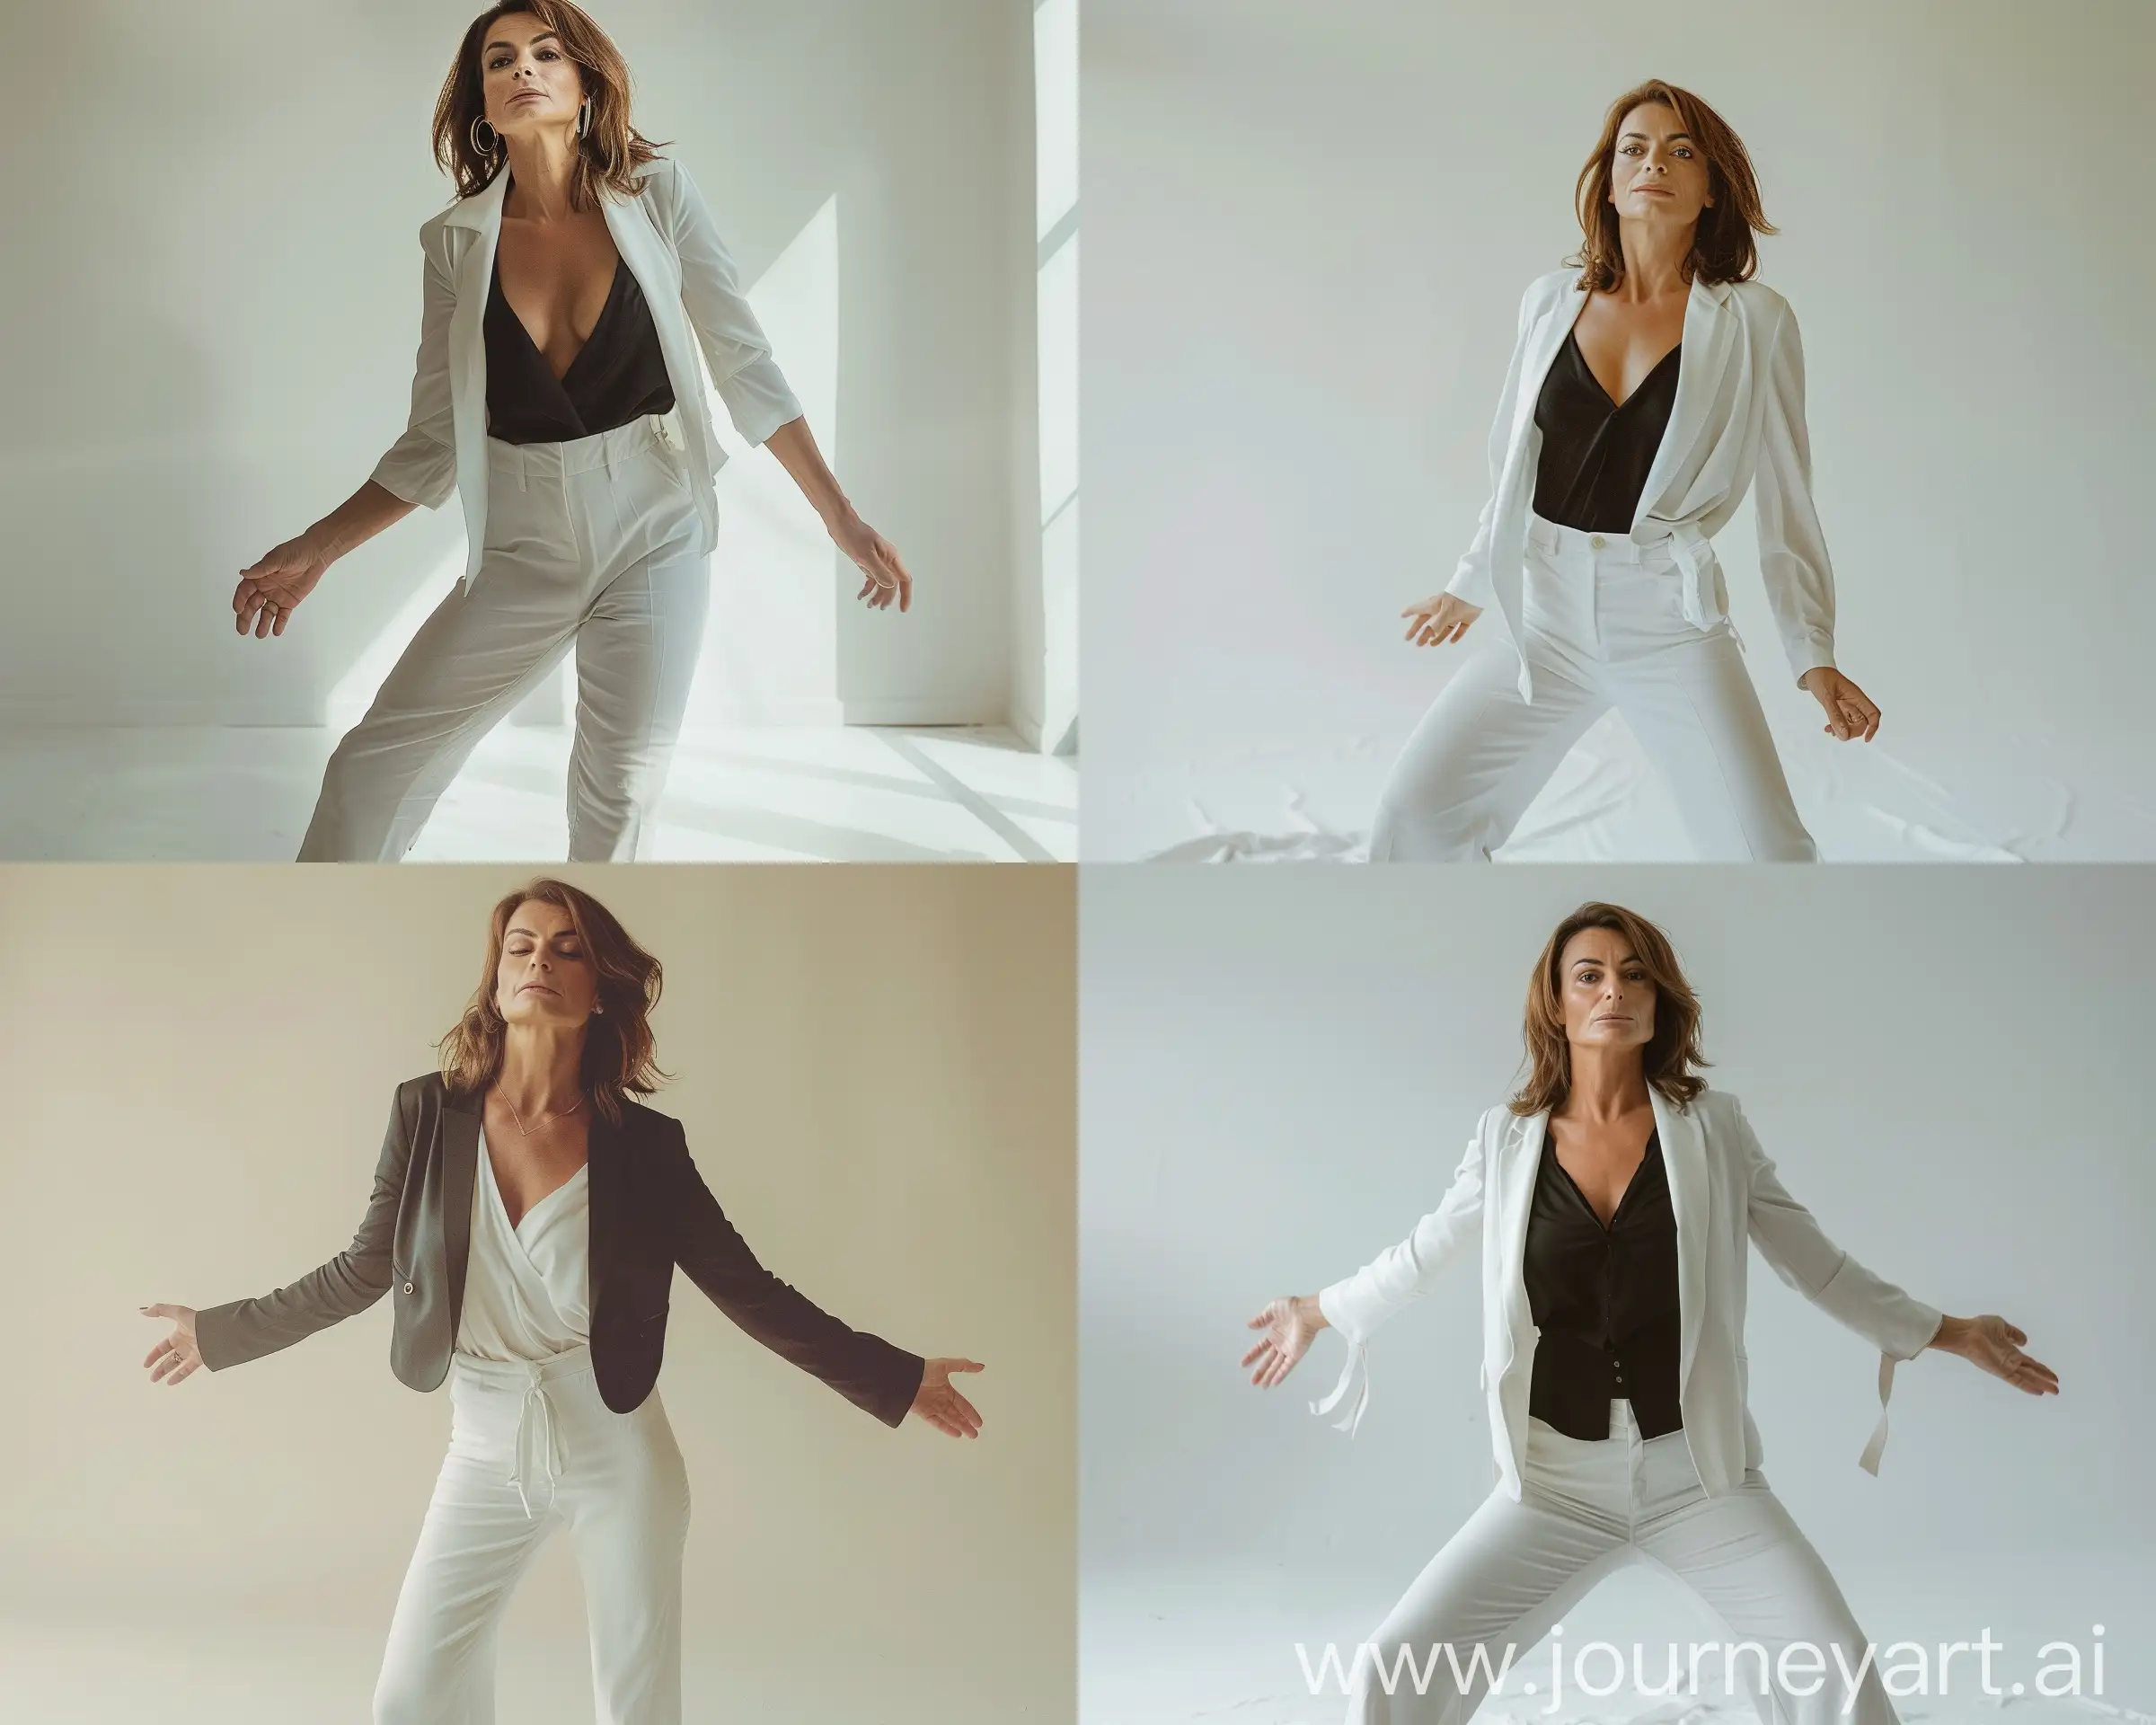 A elegant woman in a photo shoot wearing an elegant white clothes and white pants, boo pose, aesthetic full body --cref https://cdn.discordapp.com/attachments/989268365870776411/1236676757818441858/tothkatinkaklara_Take_a_photo_of_a_woman_talking_about_the_news_7c311c02-3dfe-4077-ac7a-20f98359694e.png?ex=6638e07b&is=66378efb&hm=a4ef73096f61c0e3b3d04b3dc867797135f4303cfae9f8b34909522e49a3708e& --v 6 --style raw --ar 20:16